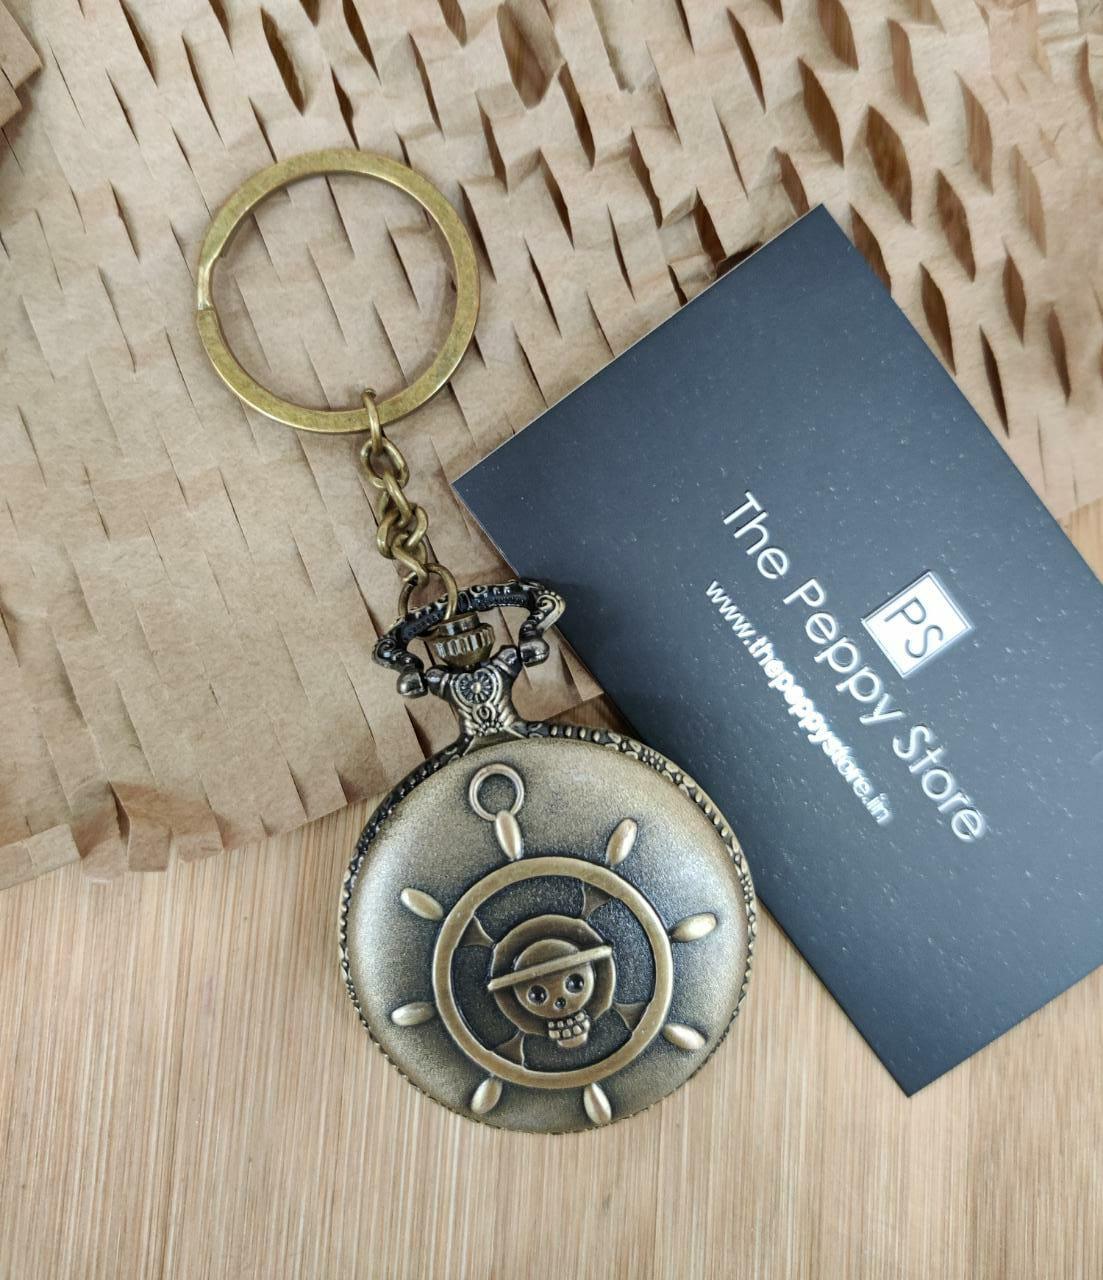 Vintage Small Keychain Pocket Watch Chain Pendant With Quartz Movement,  Music Guitar Fob Clip, And Gold Finish Perfect Gift For Men And Women From  Bertaroyal, $10.52 | DHgate.Com